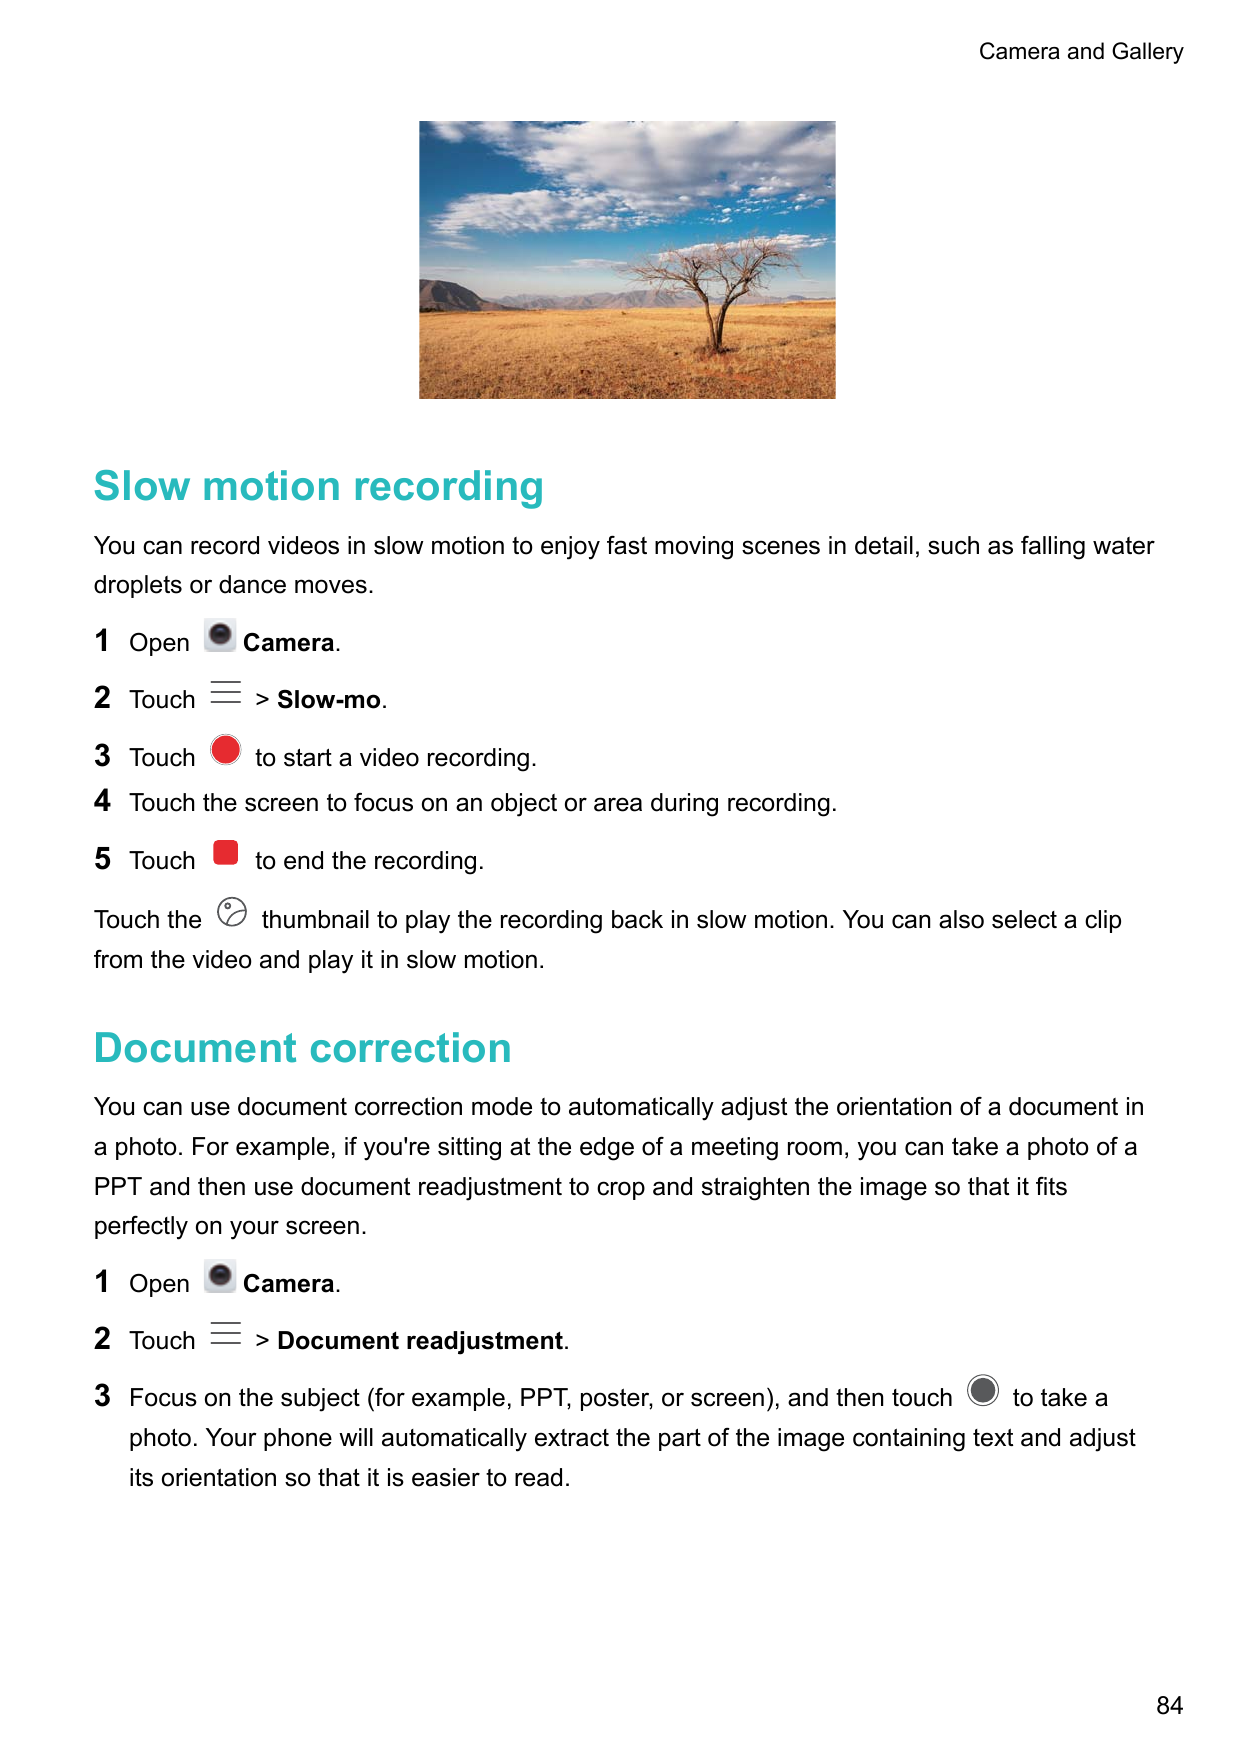 Camera and GallerySlow motion recordingYou can record videos in slow motion to enjoy fast moving scenes in detail, such as falli